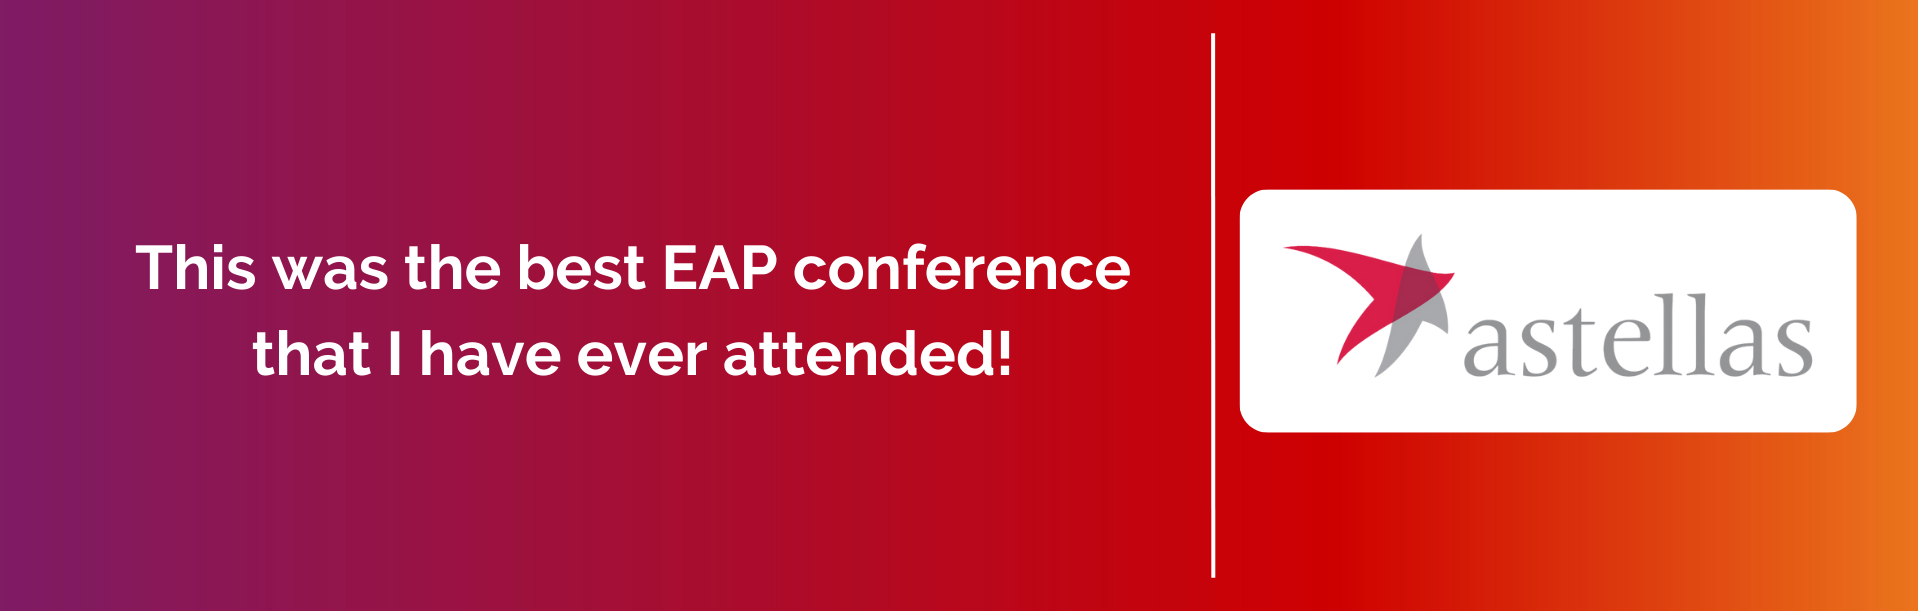 This was the best EAP conference that I have ever attended! - astellas testimonial